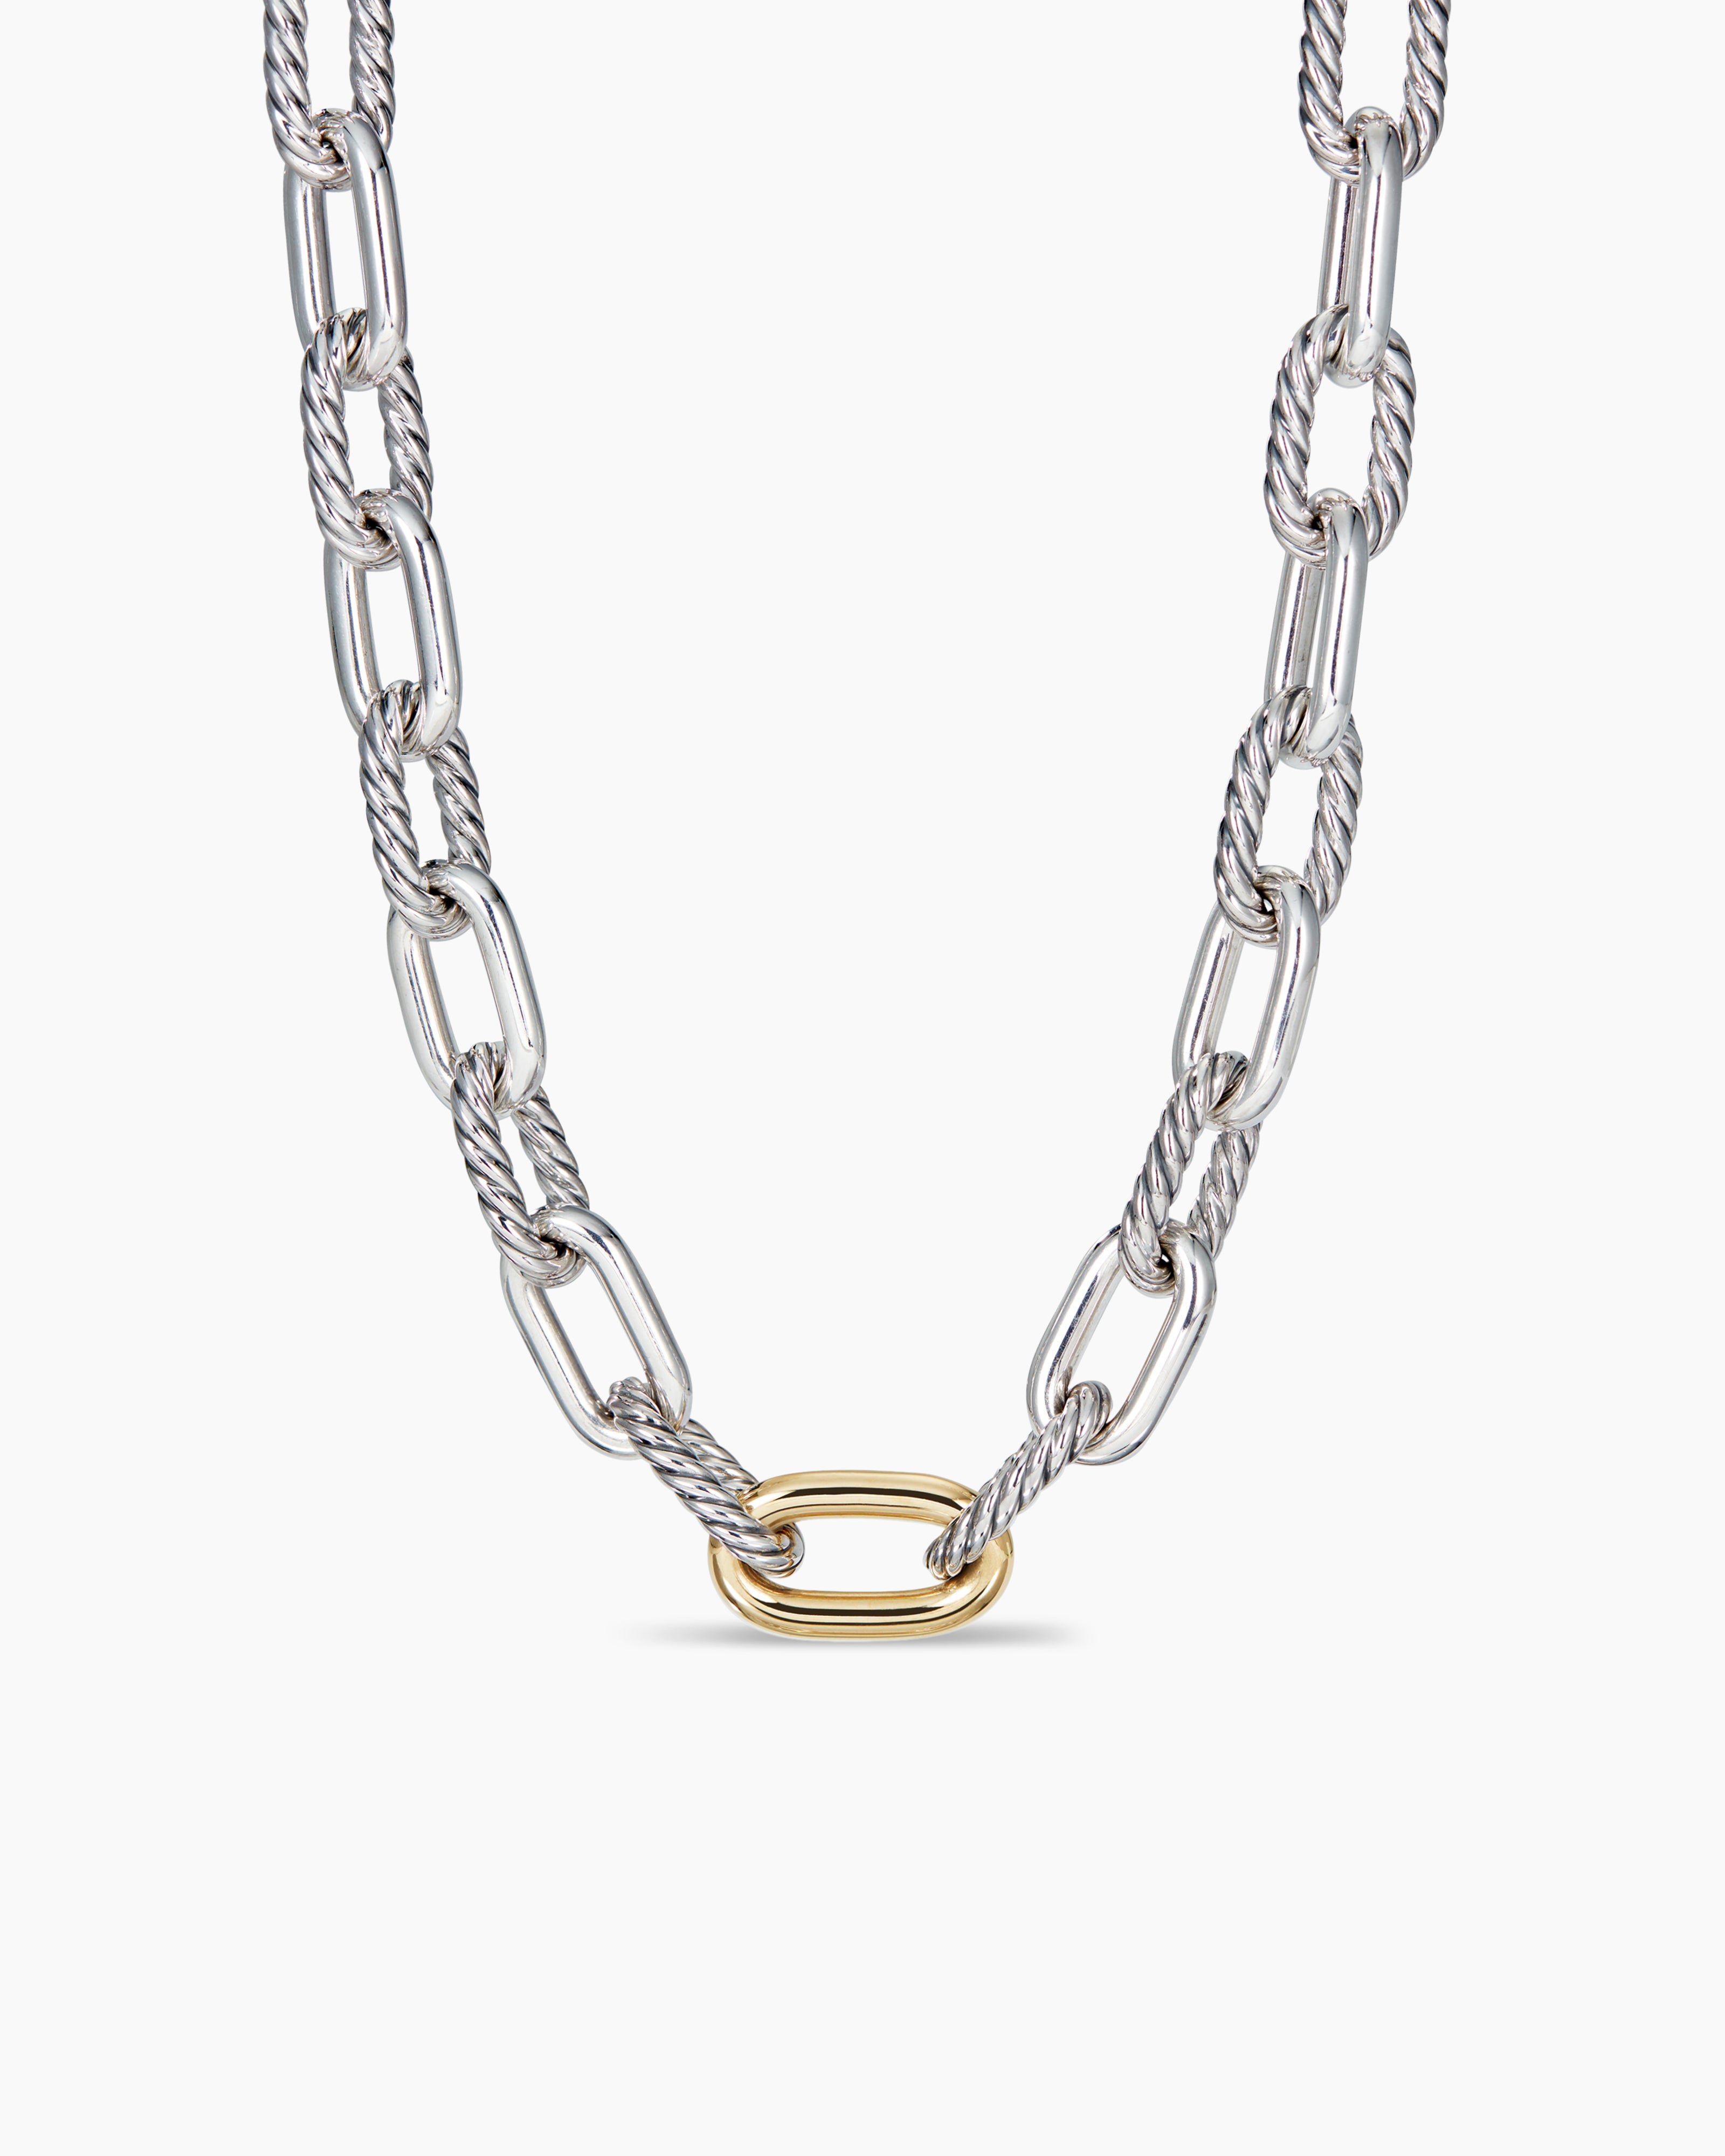 David Yurman Madison Extra Small Necklace, 5.5mm - 36 inches | REEDS  Jewelers